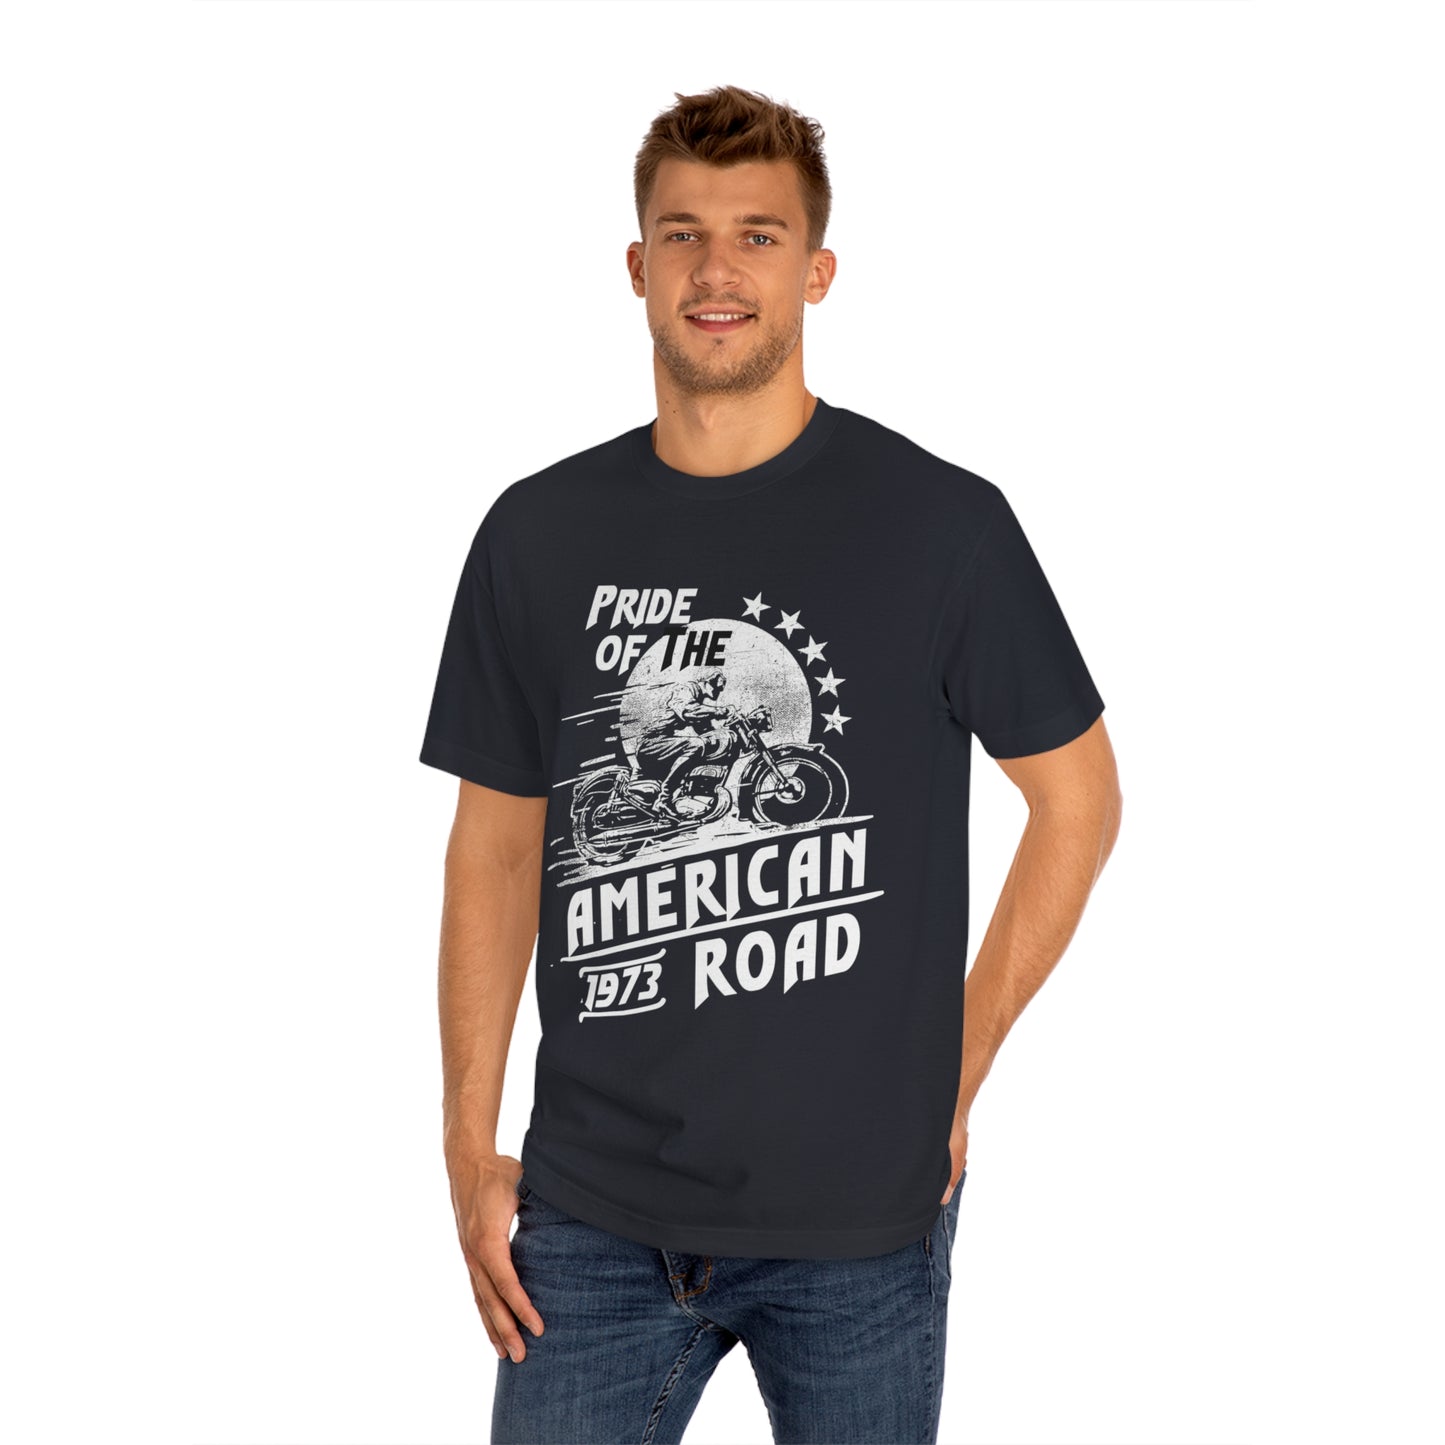 Ride of the american 1973 road Unisex Classic Tee